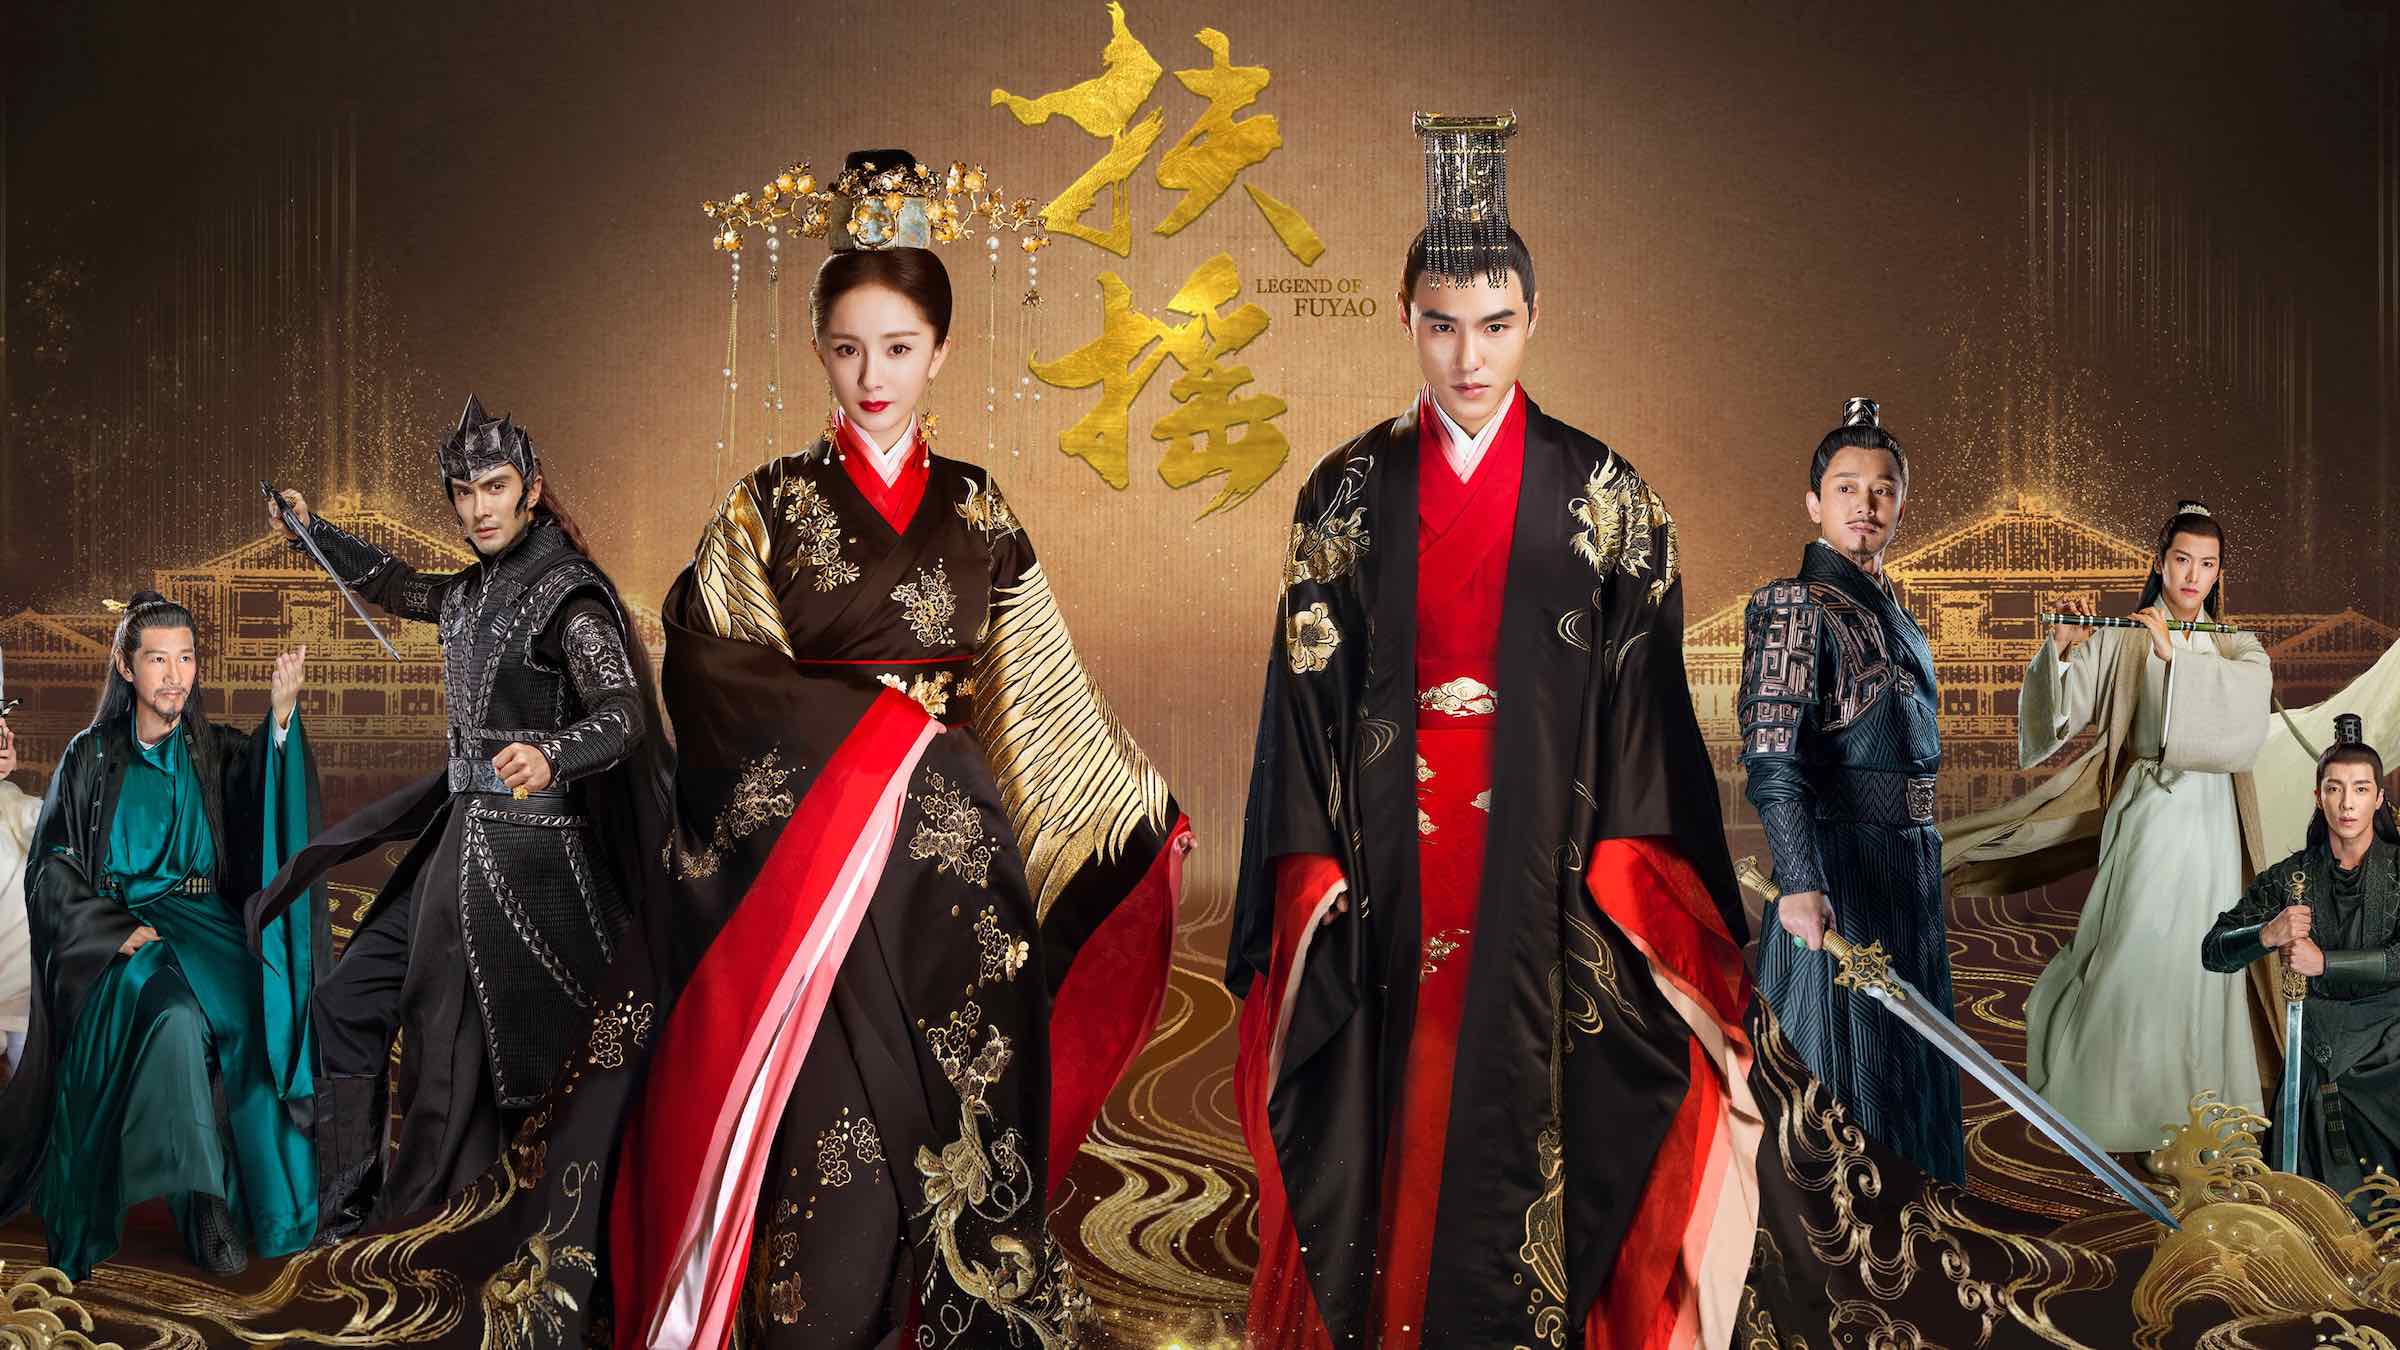 We’ve continued our quest for more enthralling C-Dramas after binging 'Legend of Fuyao'. Here’s the scoop on dramas we can’t get enough of!